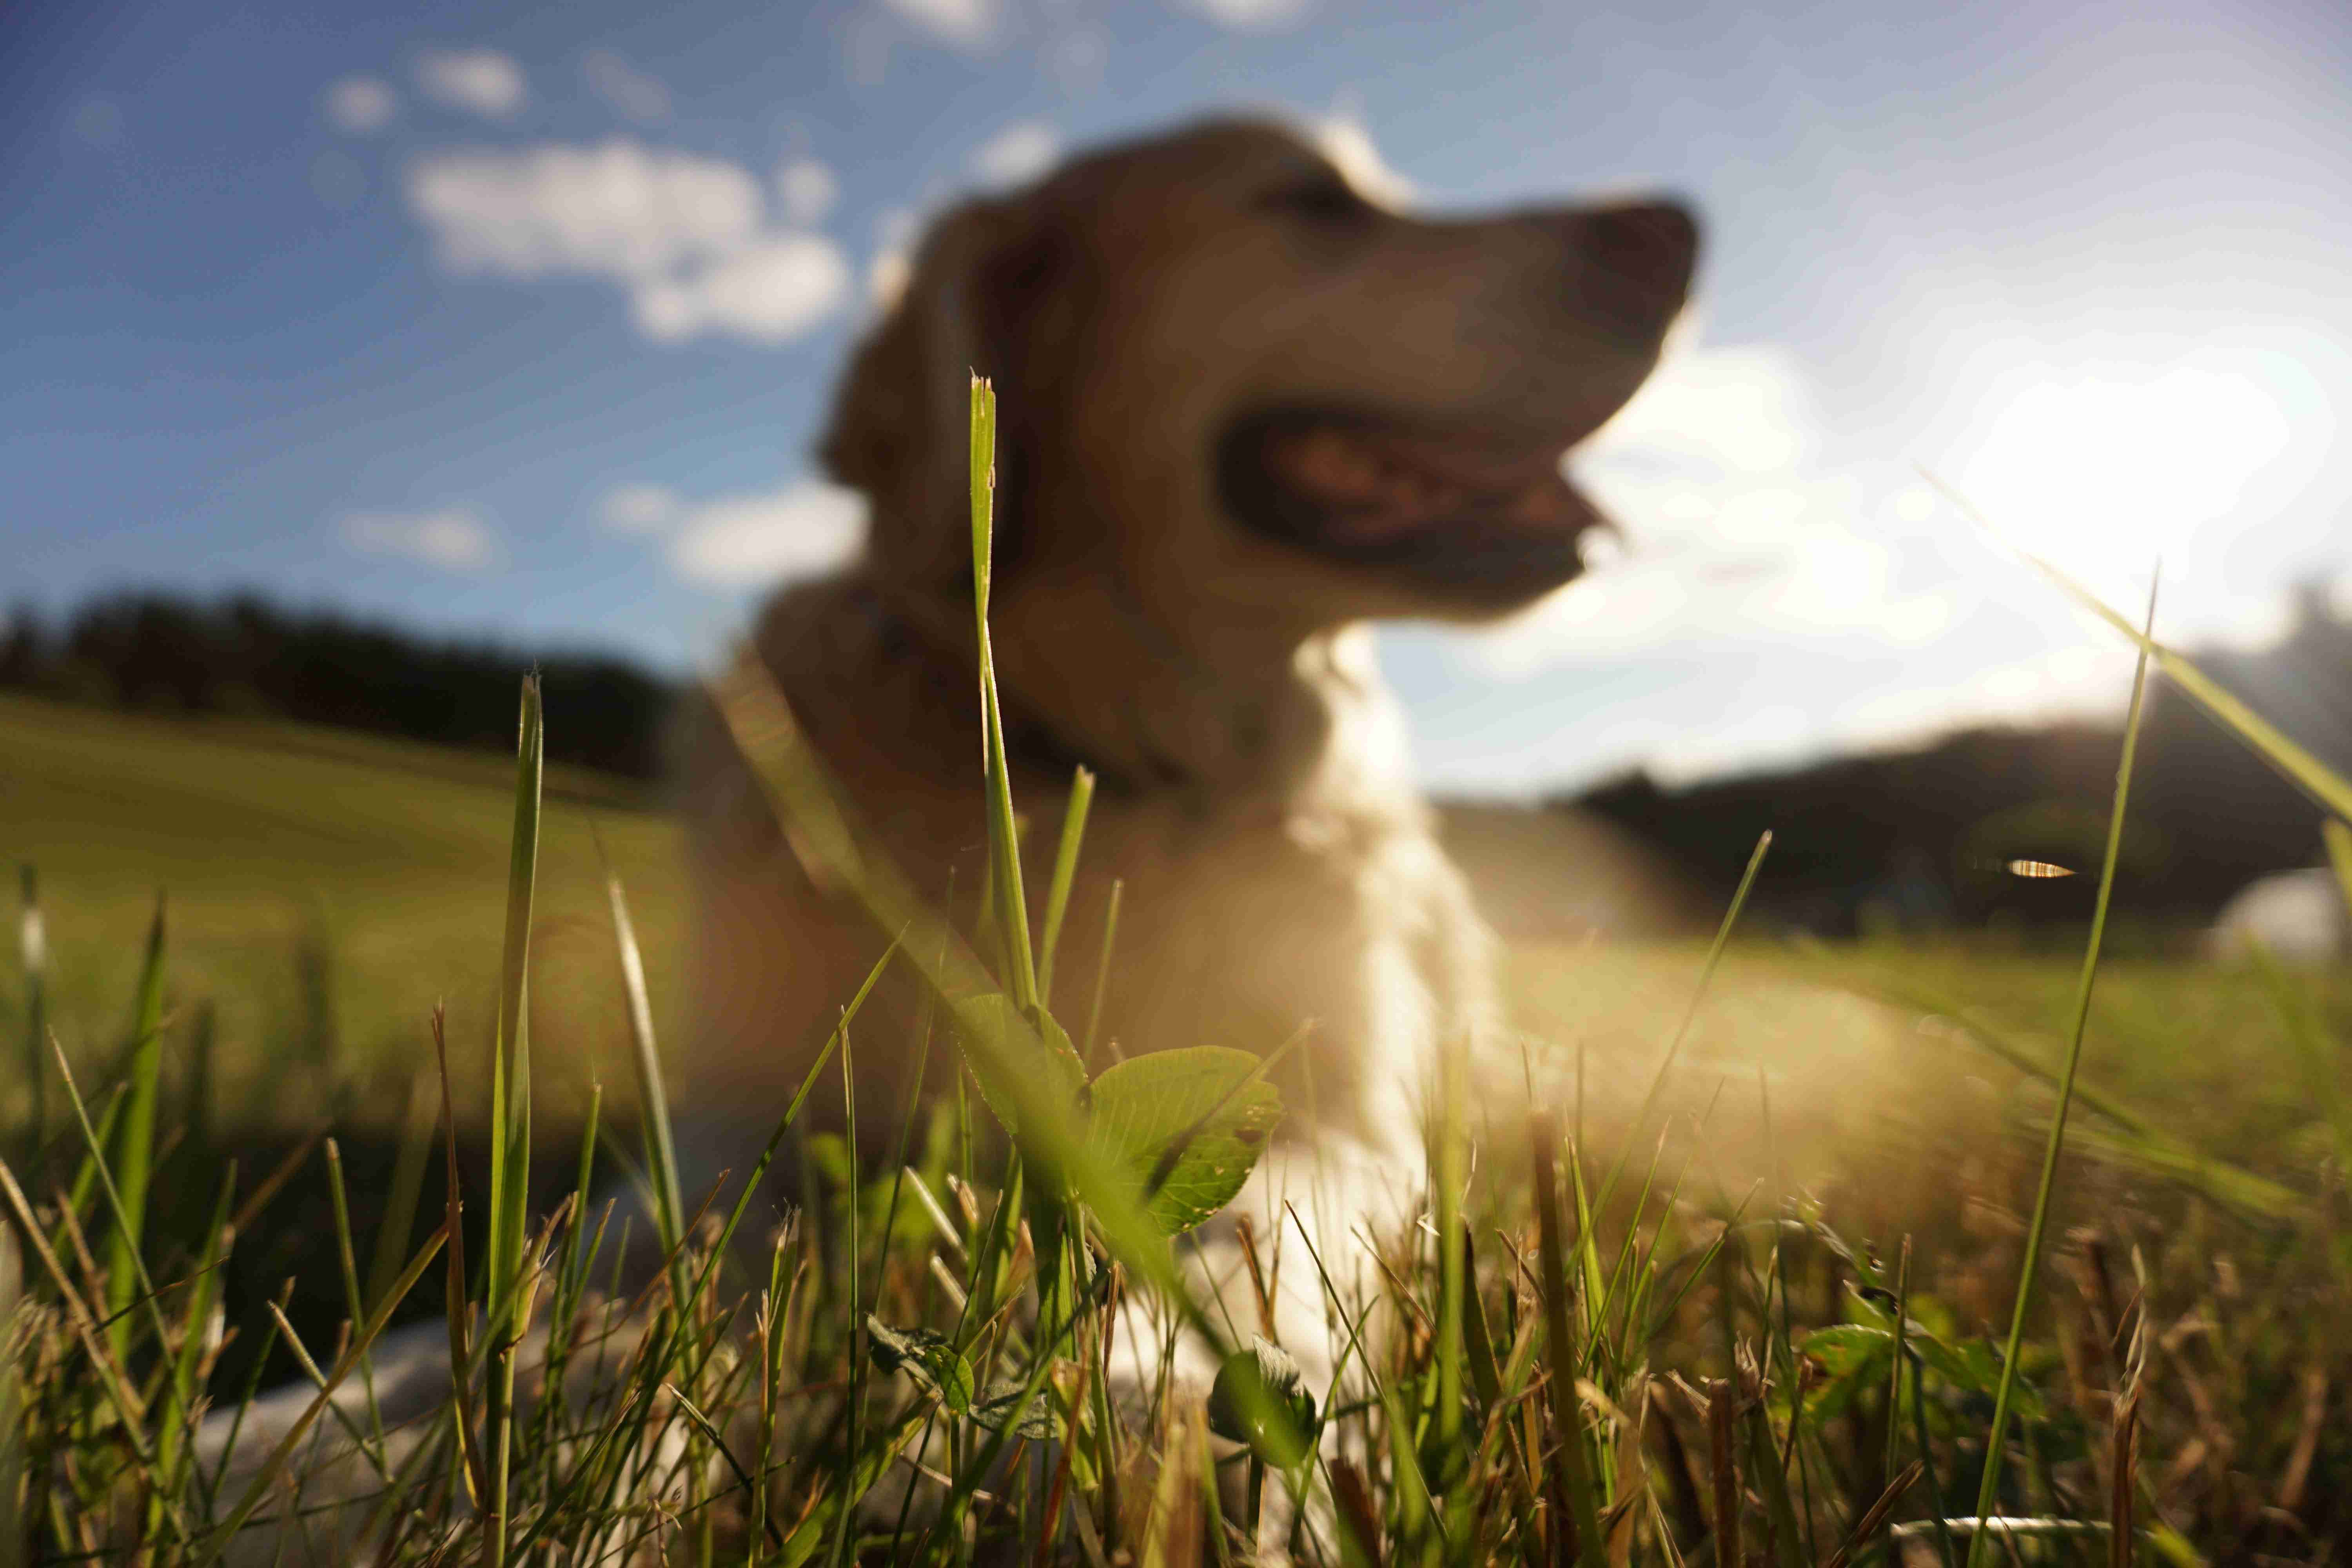 Can Golden Retrievers develop separation anxiety?